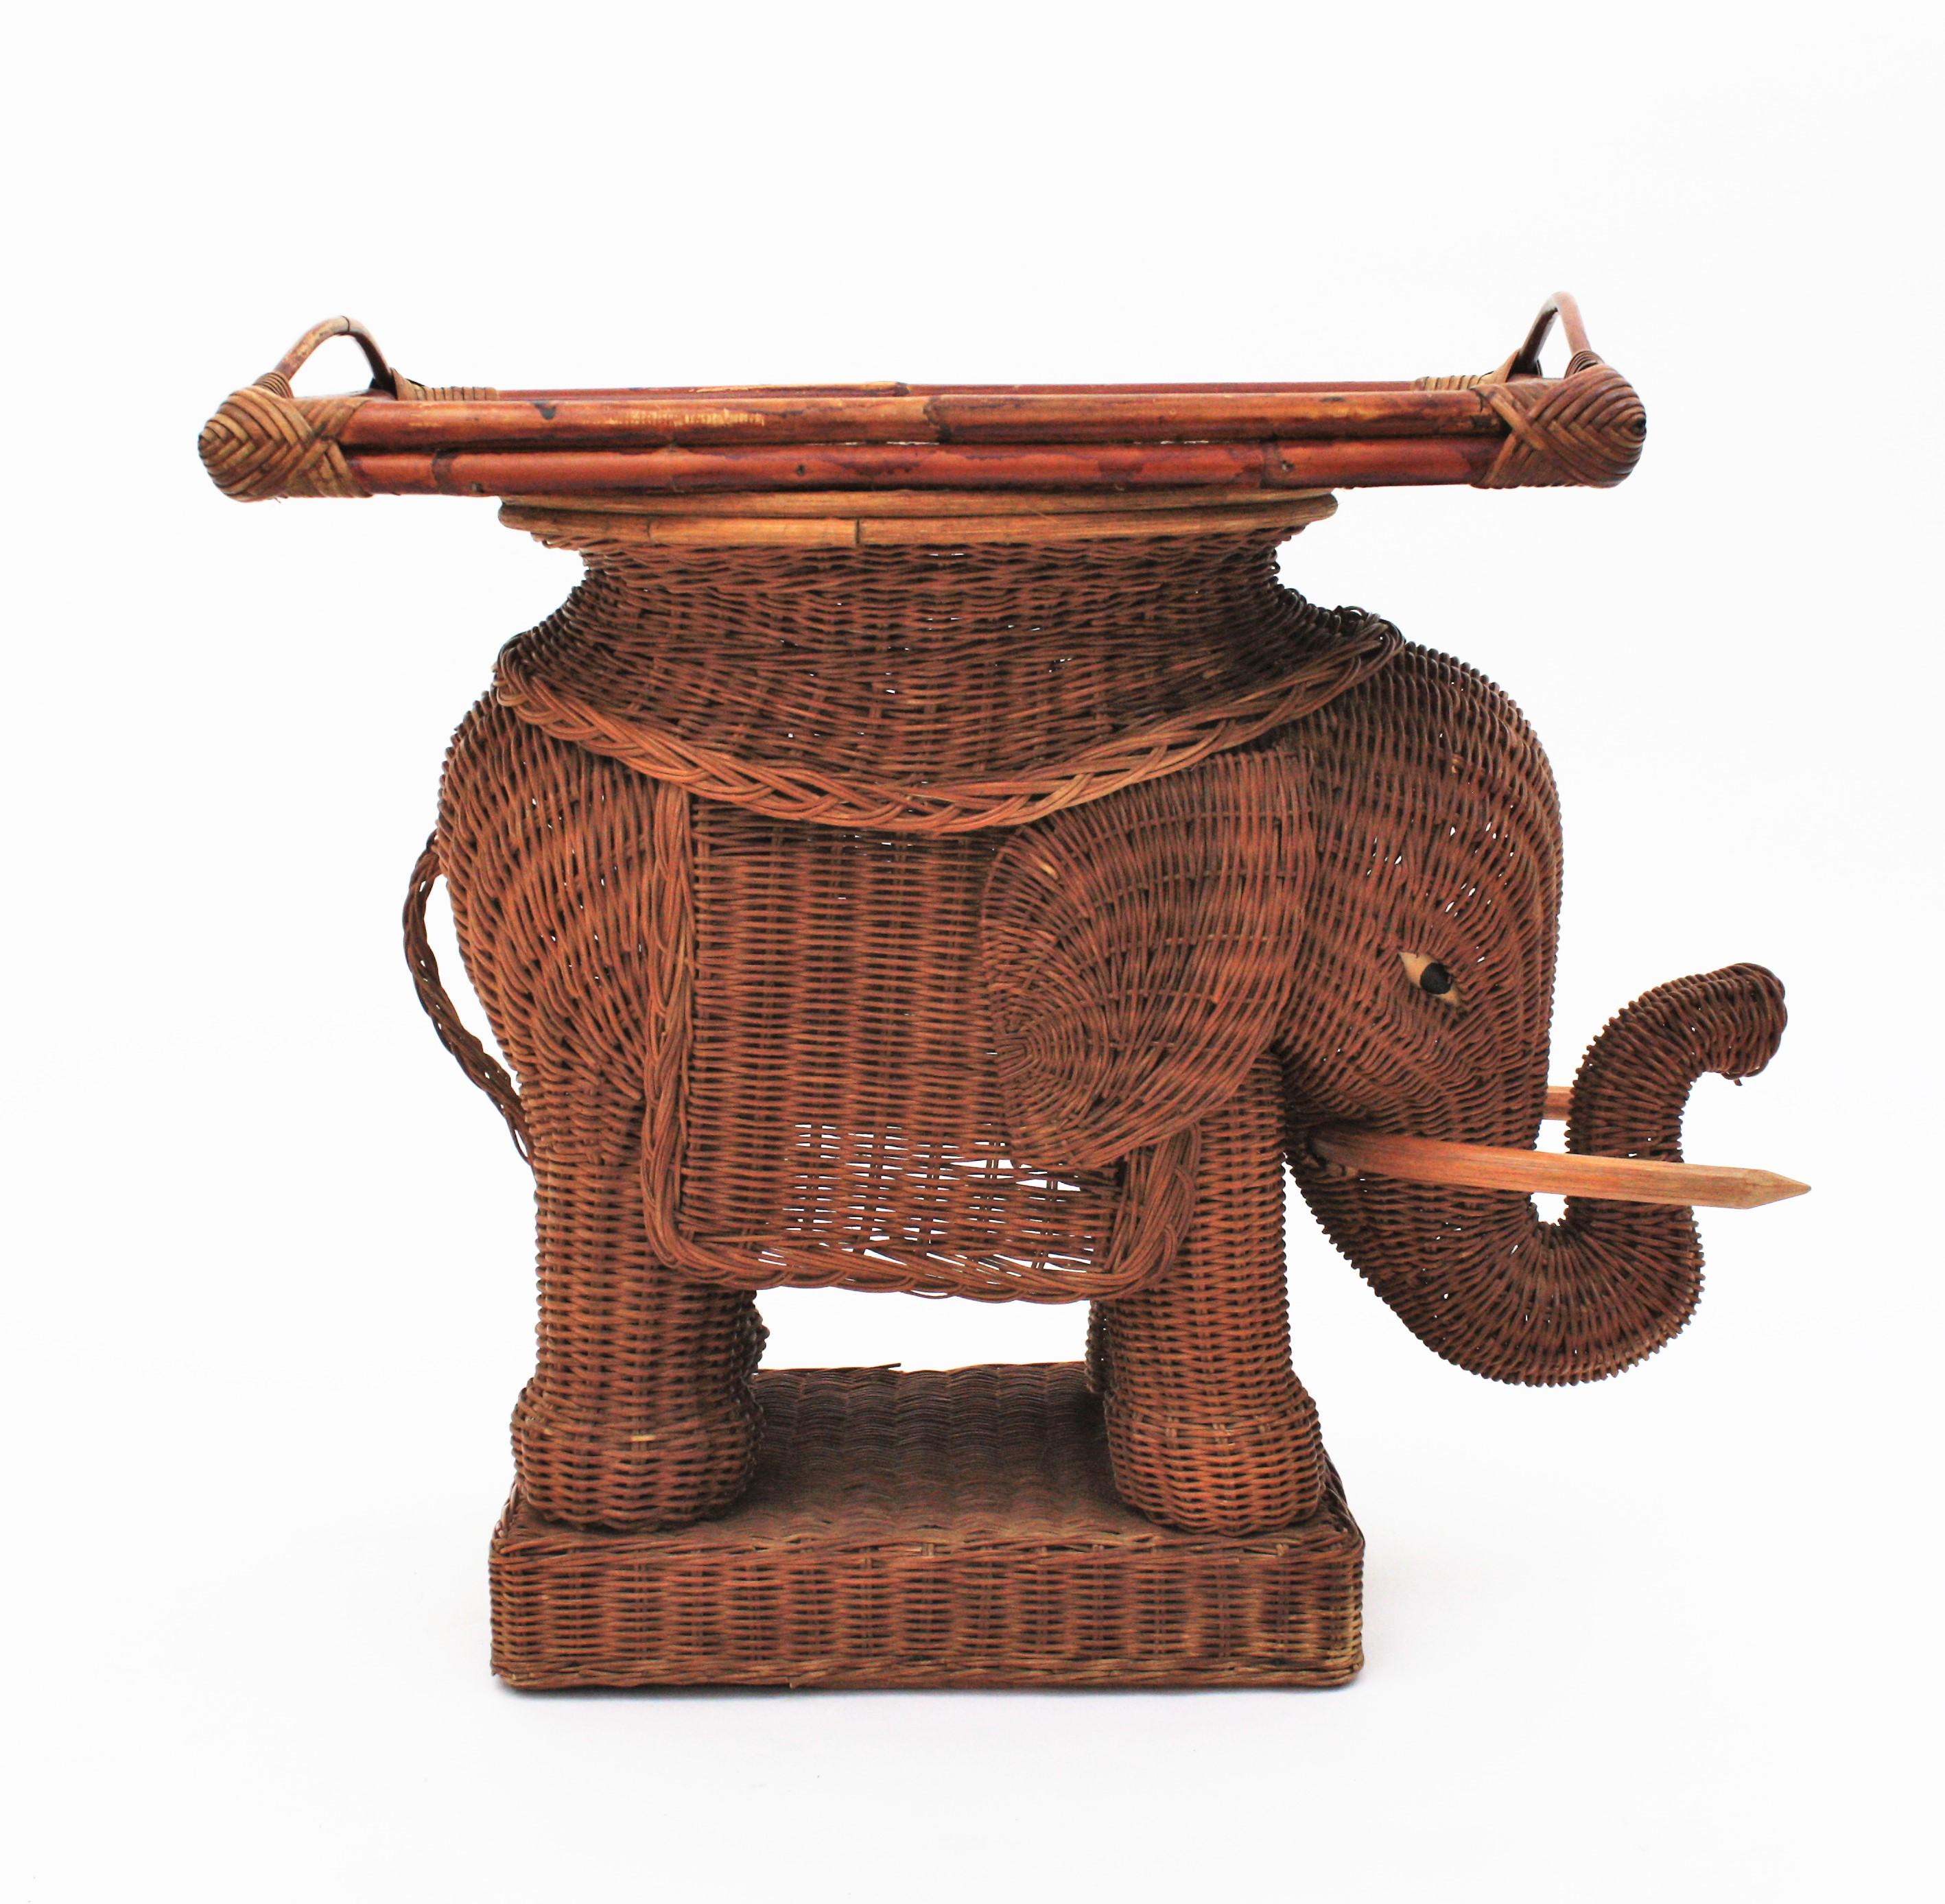 Eye-catching woven rattan end table or drinks table with removable tray top. France, 1940s-1950s.
This elephant shaped end table stand was beautifully constructed in hand braided rattan / wicker accented with wood tusks. The tray top is removable